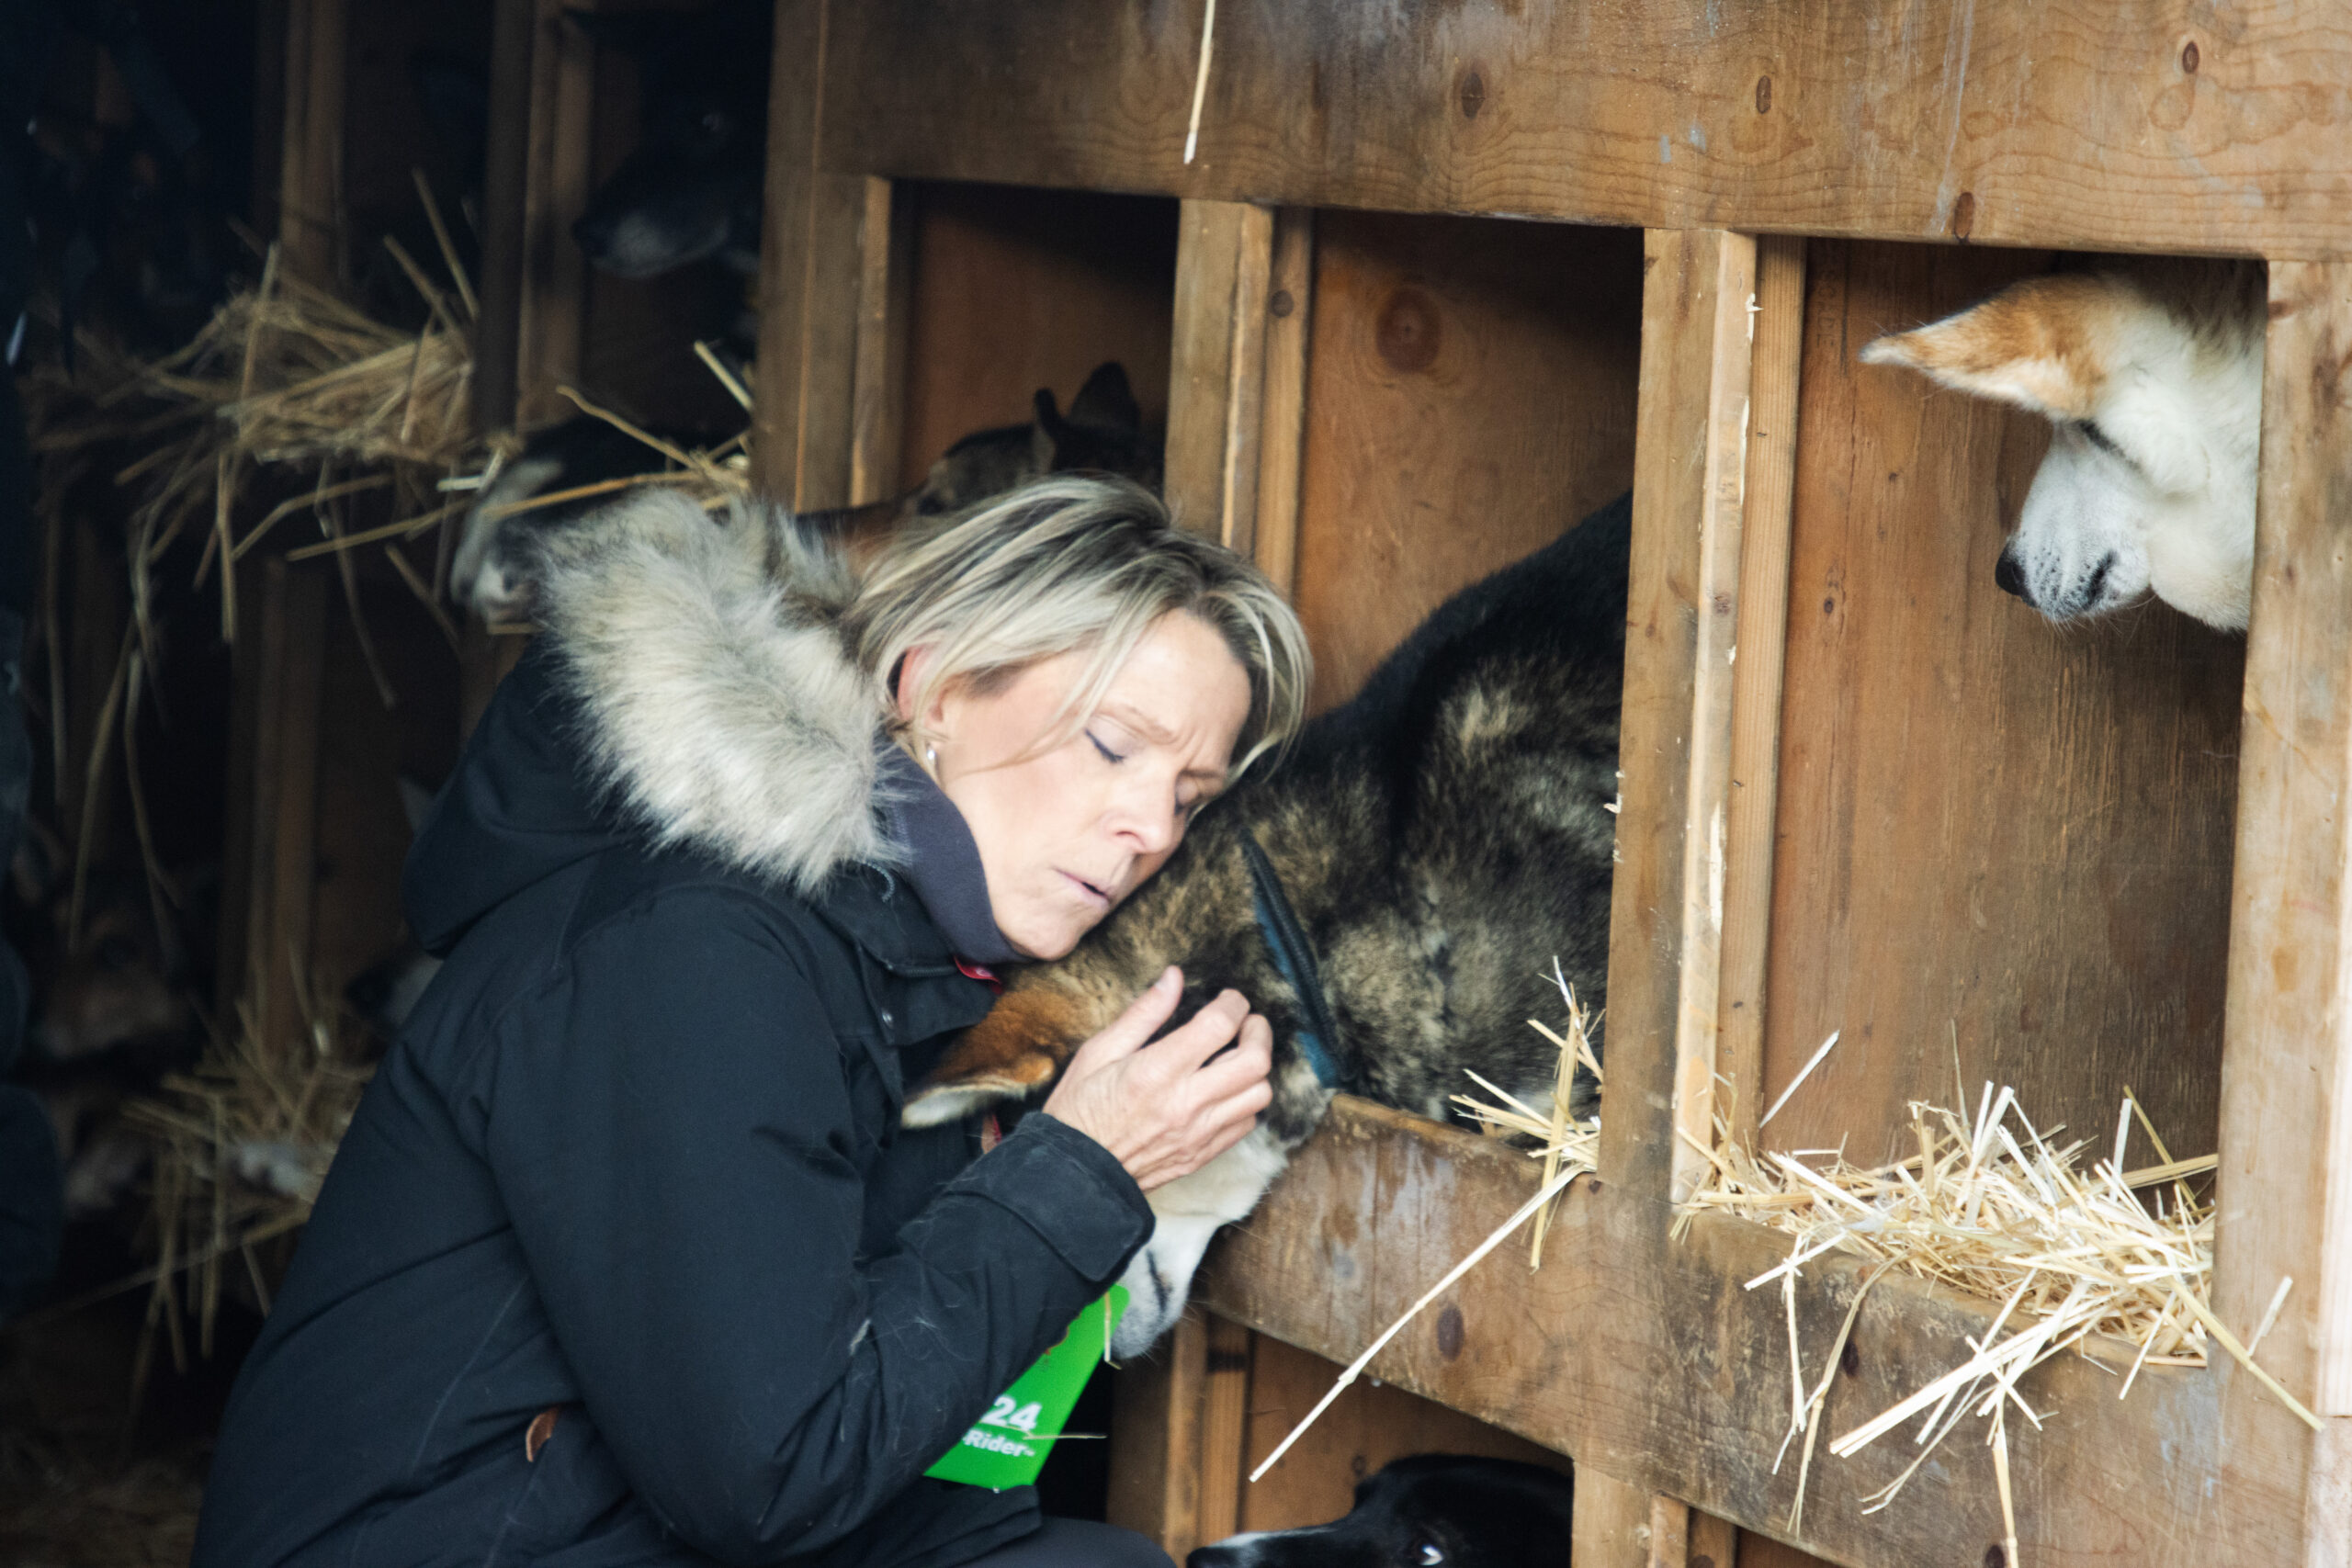 A woman with blonde hair in a dark coat comforts a dog that is in a shared crate with other dogs on a bed of straw.